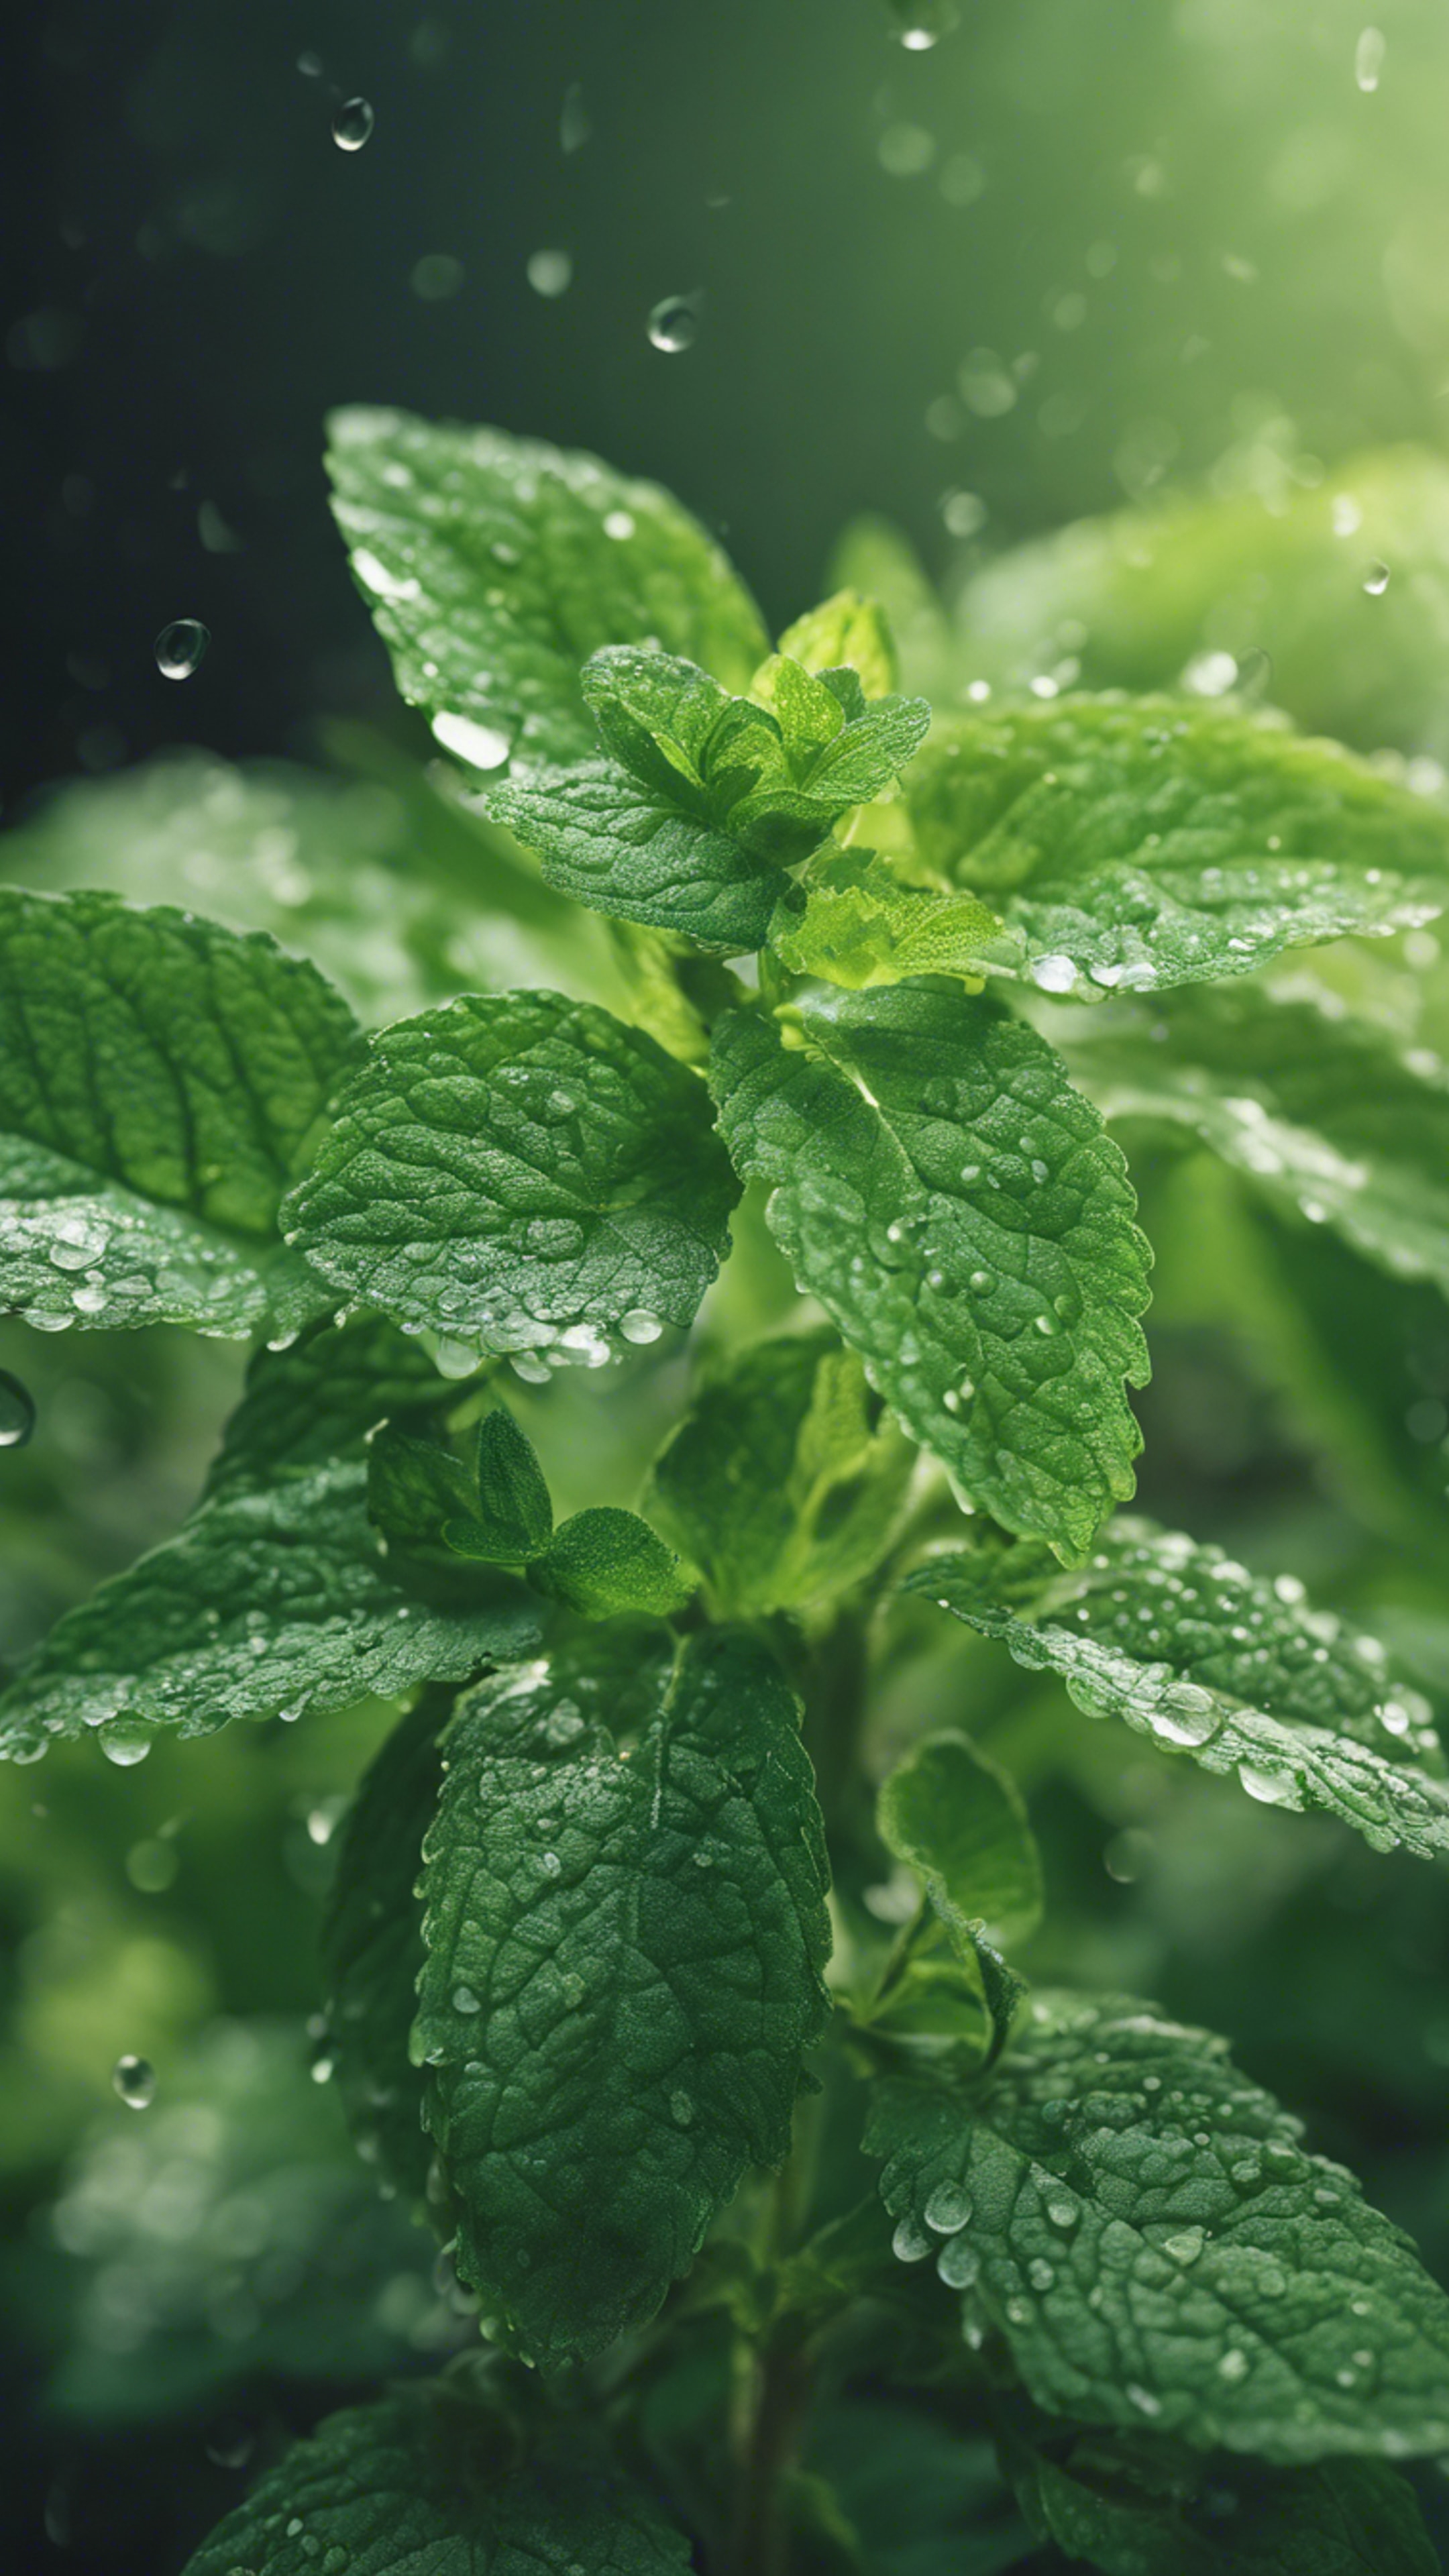 A closeup of a refreshing mint plant with dew drops on its fresh green leaves. Papel de parede[bde7a5587e54449fbb31]